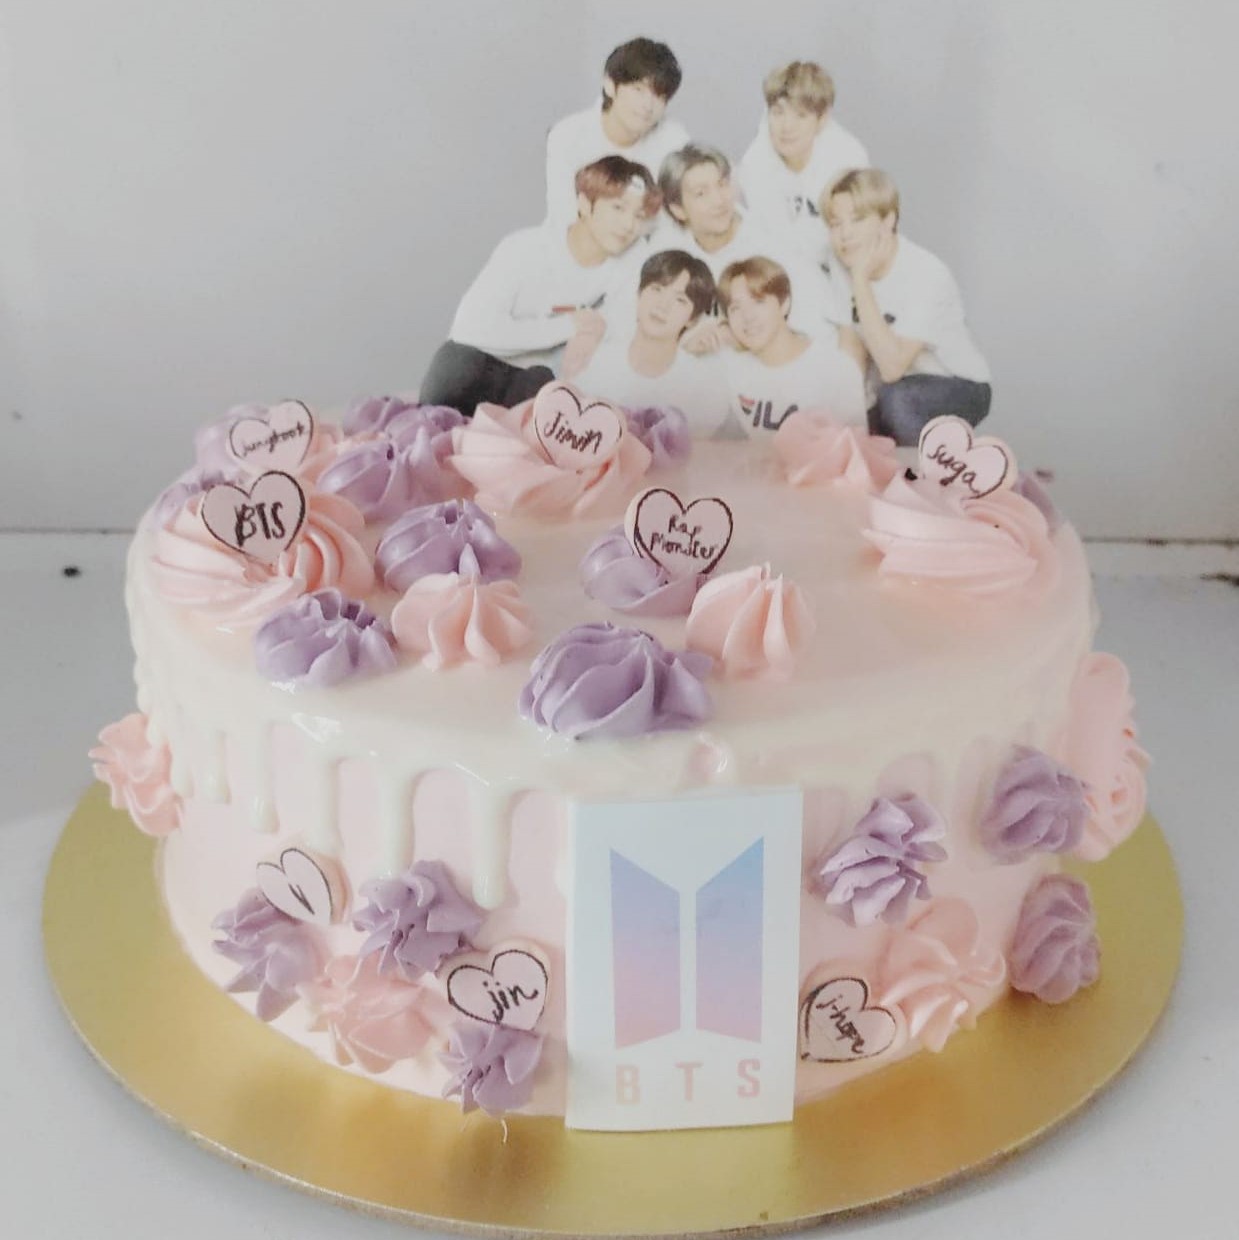 BTS theme cakes - Cakes and Bakes